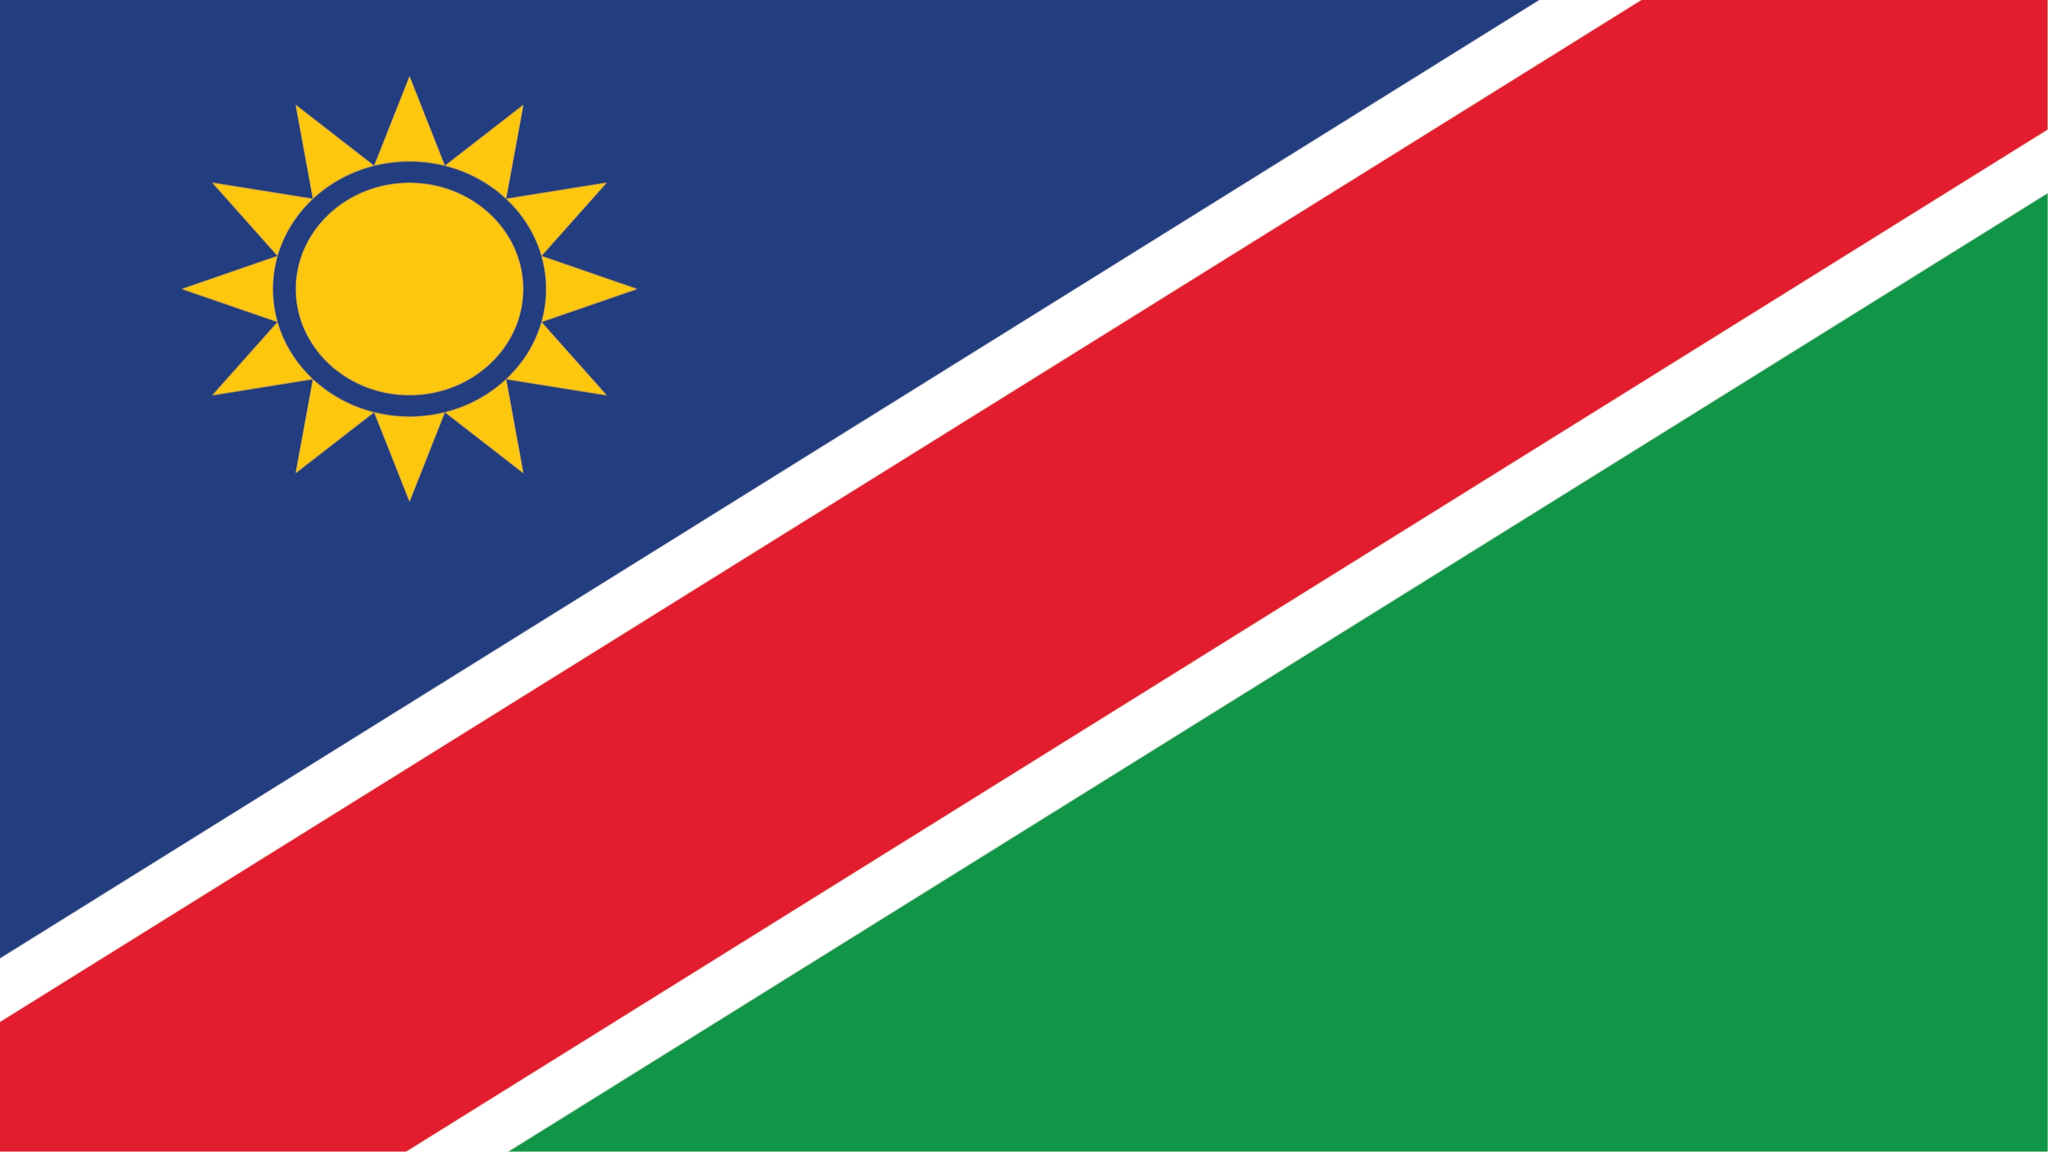 The Namibian flag has two horizontal stripes: blue on top, green on bottom. In the top left corner, there's a diagonal red stripe outlined in white. Inside the red stripe, there's a golden sun with twelve triangular rays.